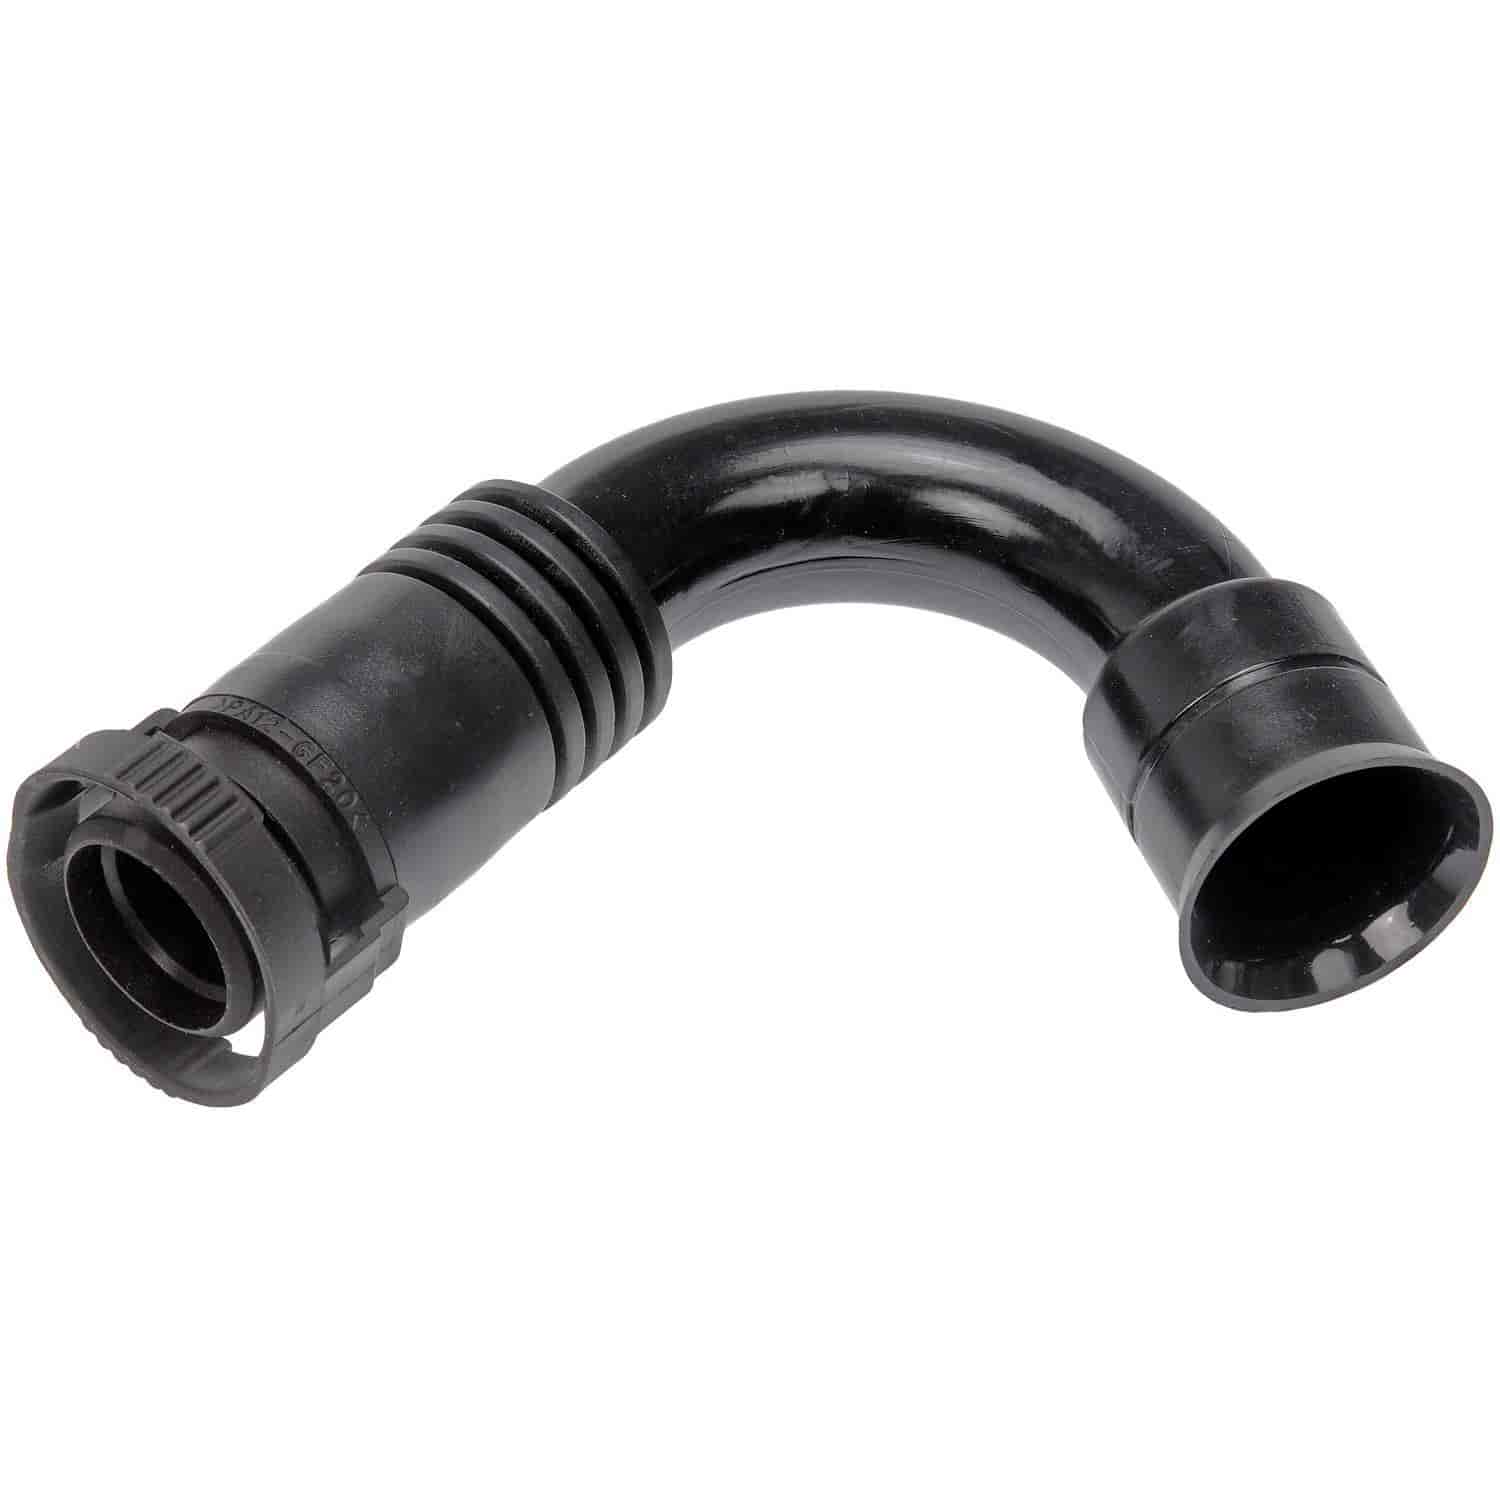 PCV Breather Hose - Goes from PCV valve to oil filter housing